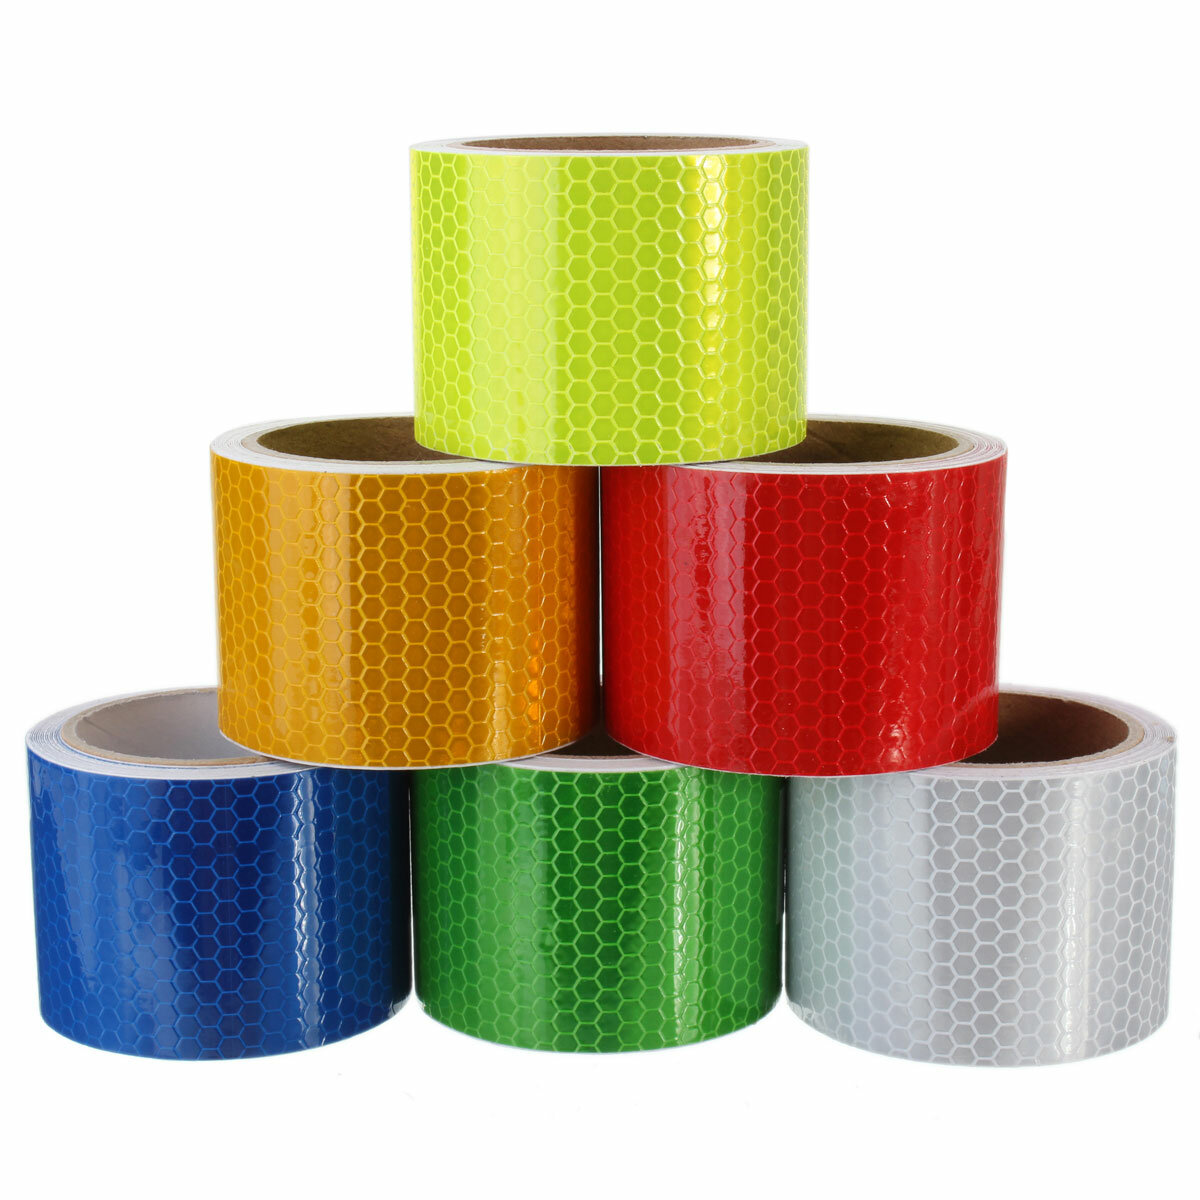 Safety Caution Reflective Tape Warning Tape Sticker Self Adhesive Tape 5cmFBYN 